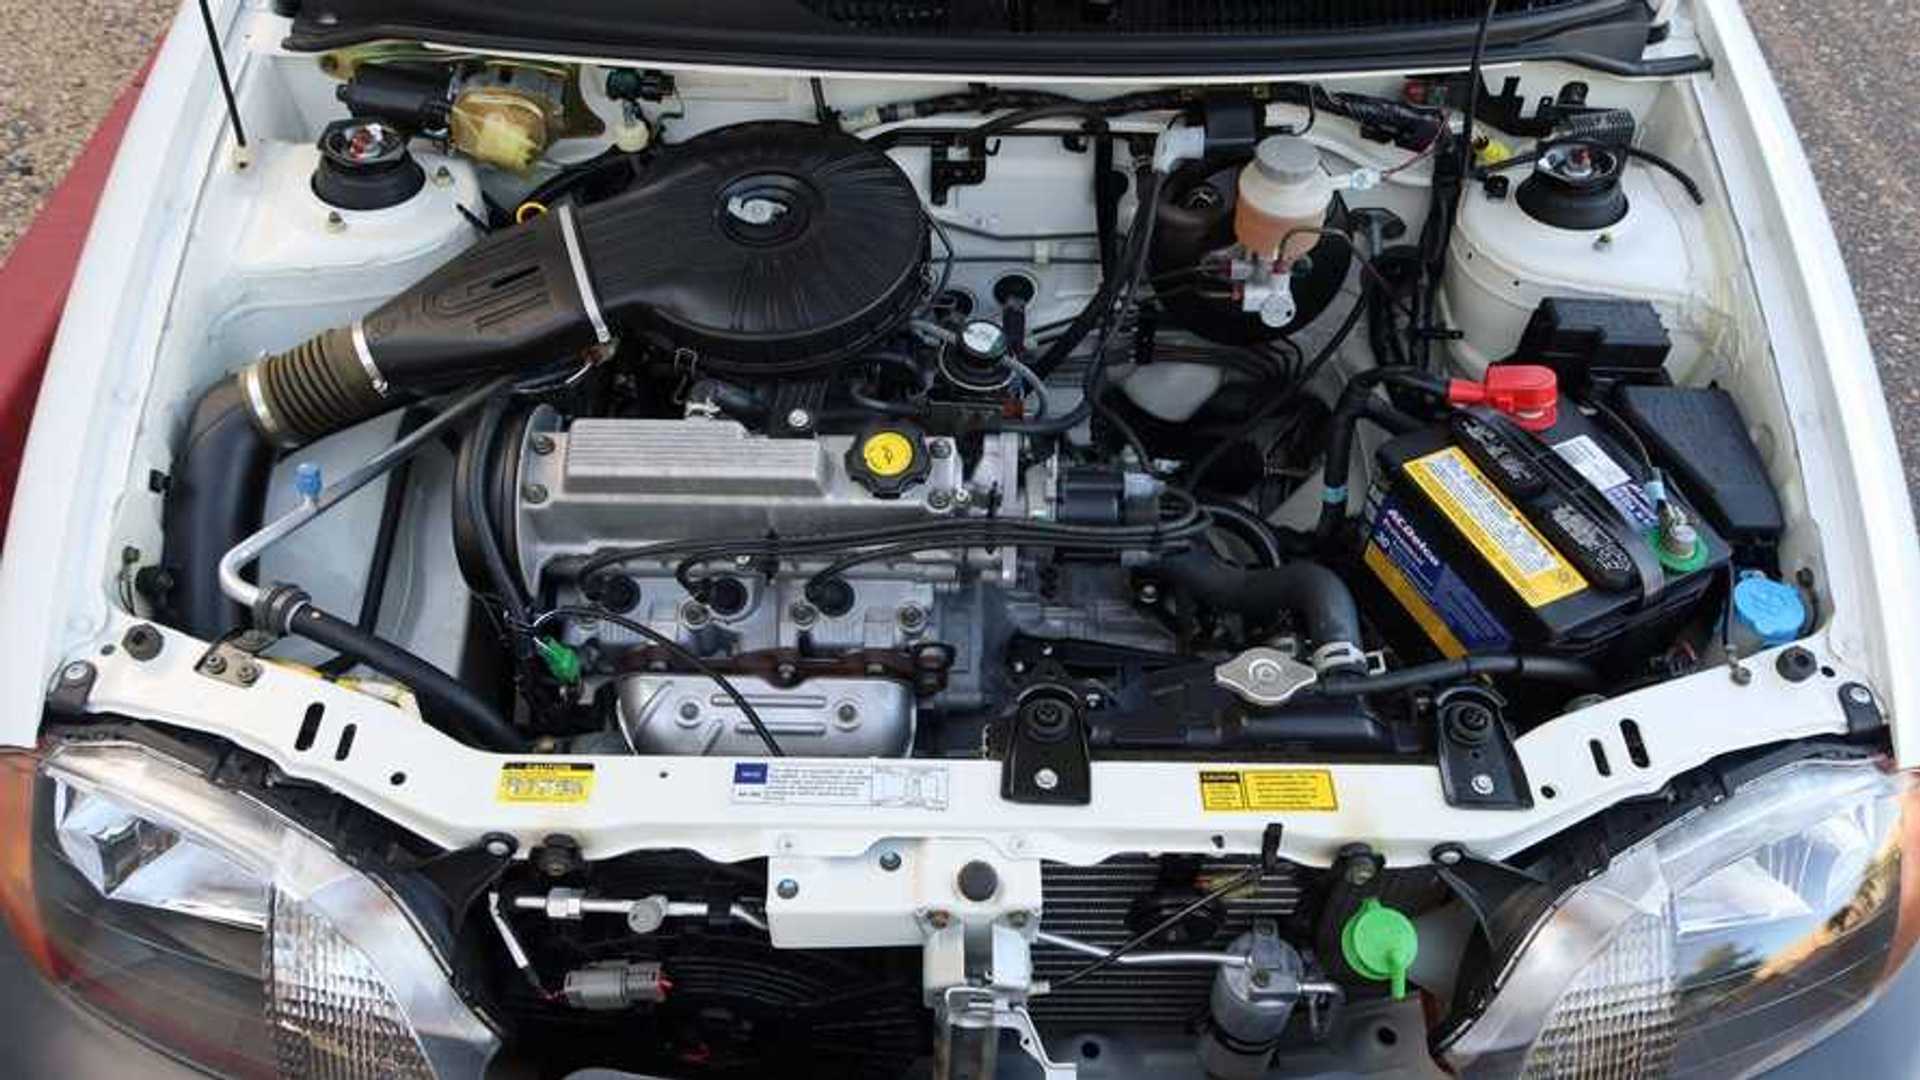 400-Mile 2000 Chevrolet Metro For Sale Feels Unreasonably Expensive